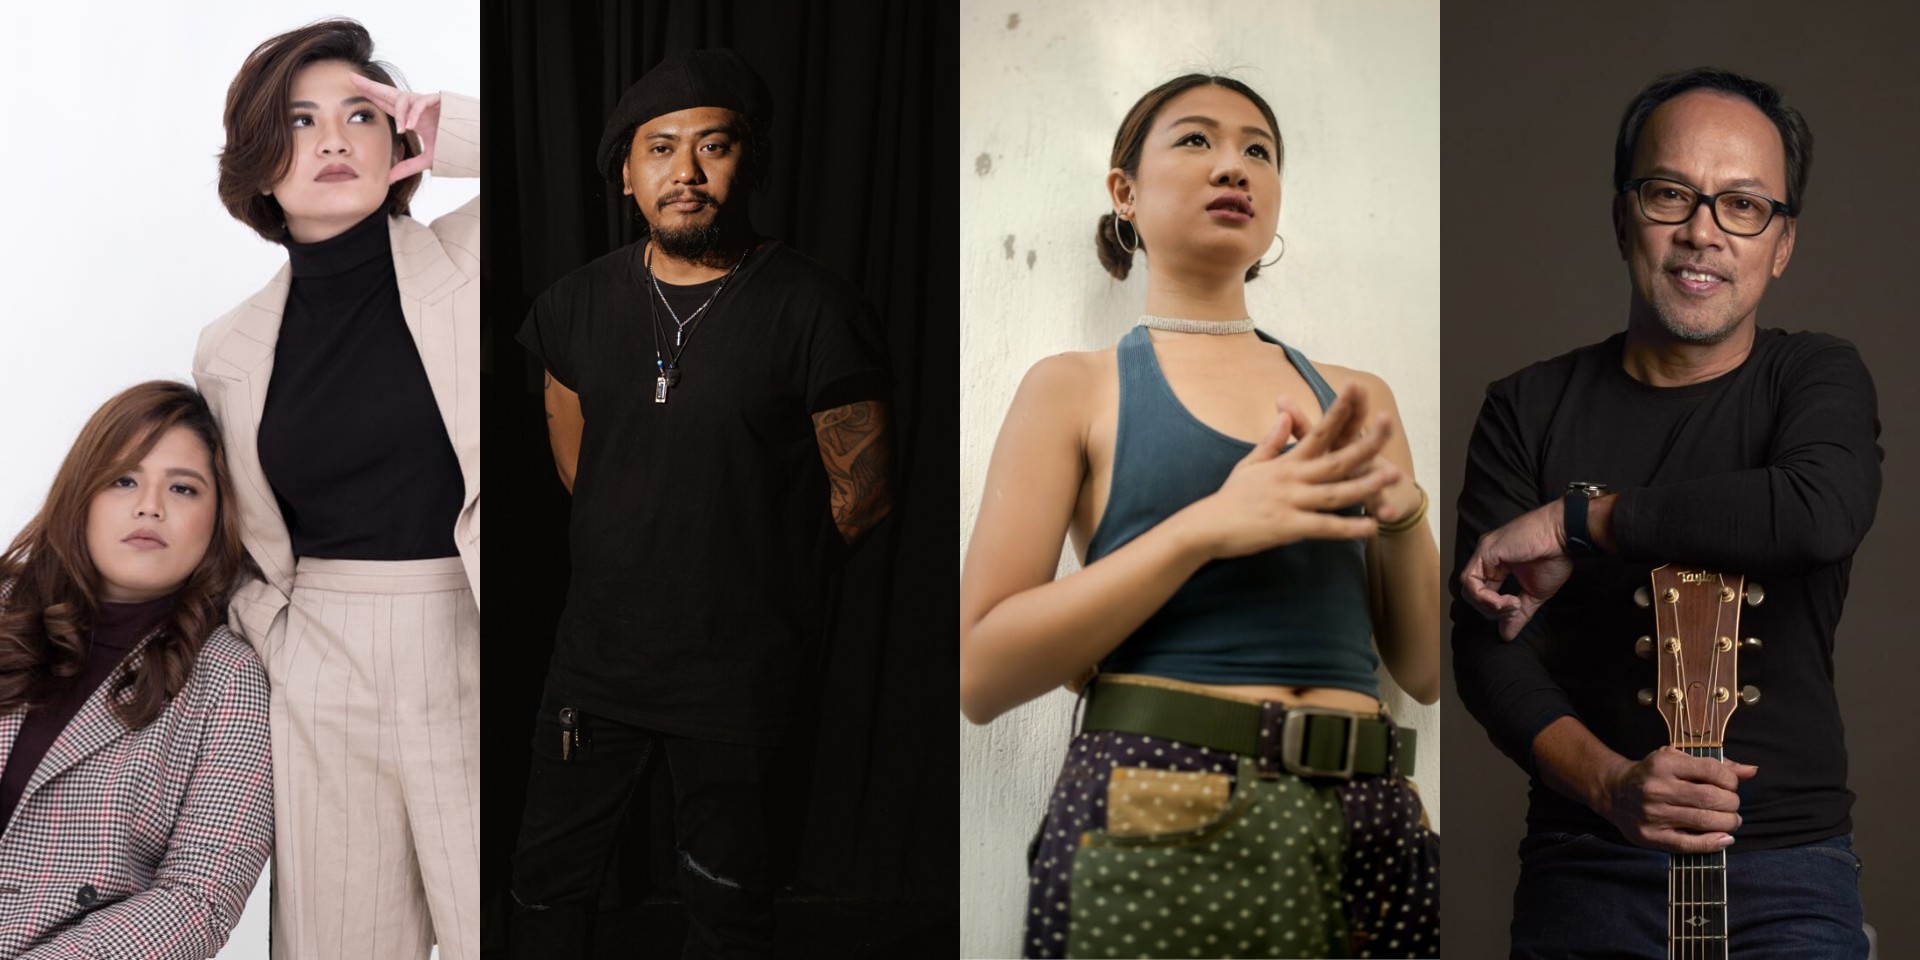 Steve Badiola, Noel Cabangon and Leanne and Naara, August Wahh,  and more release new music – listen